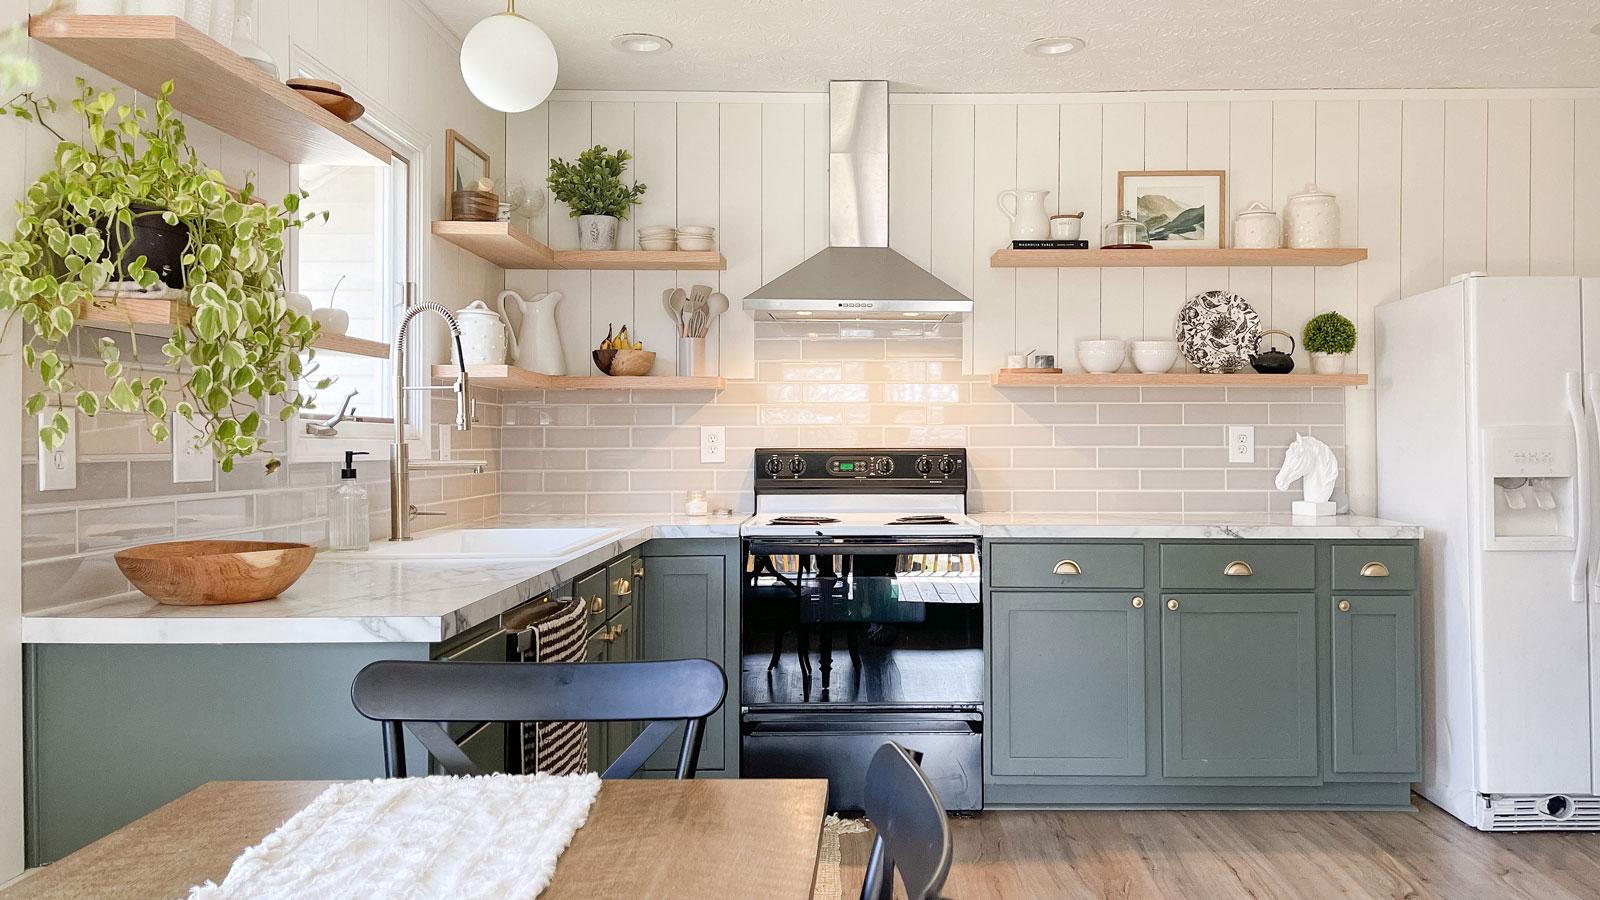 DIY fans give dated kitchen a Studio McGee-style kitchen makeover | Real Homes